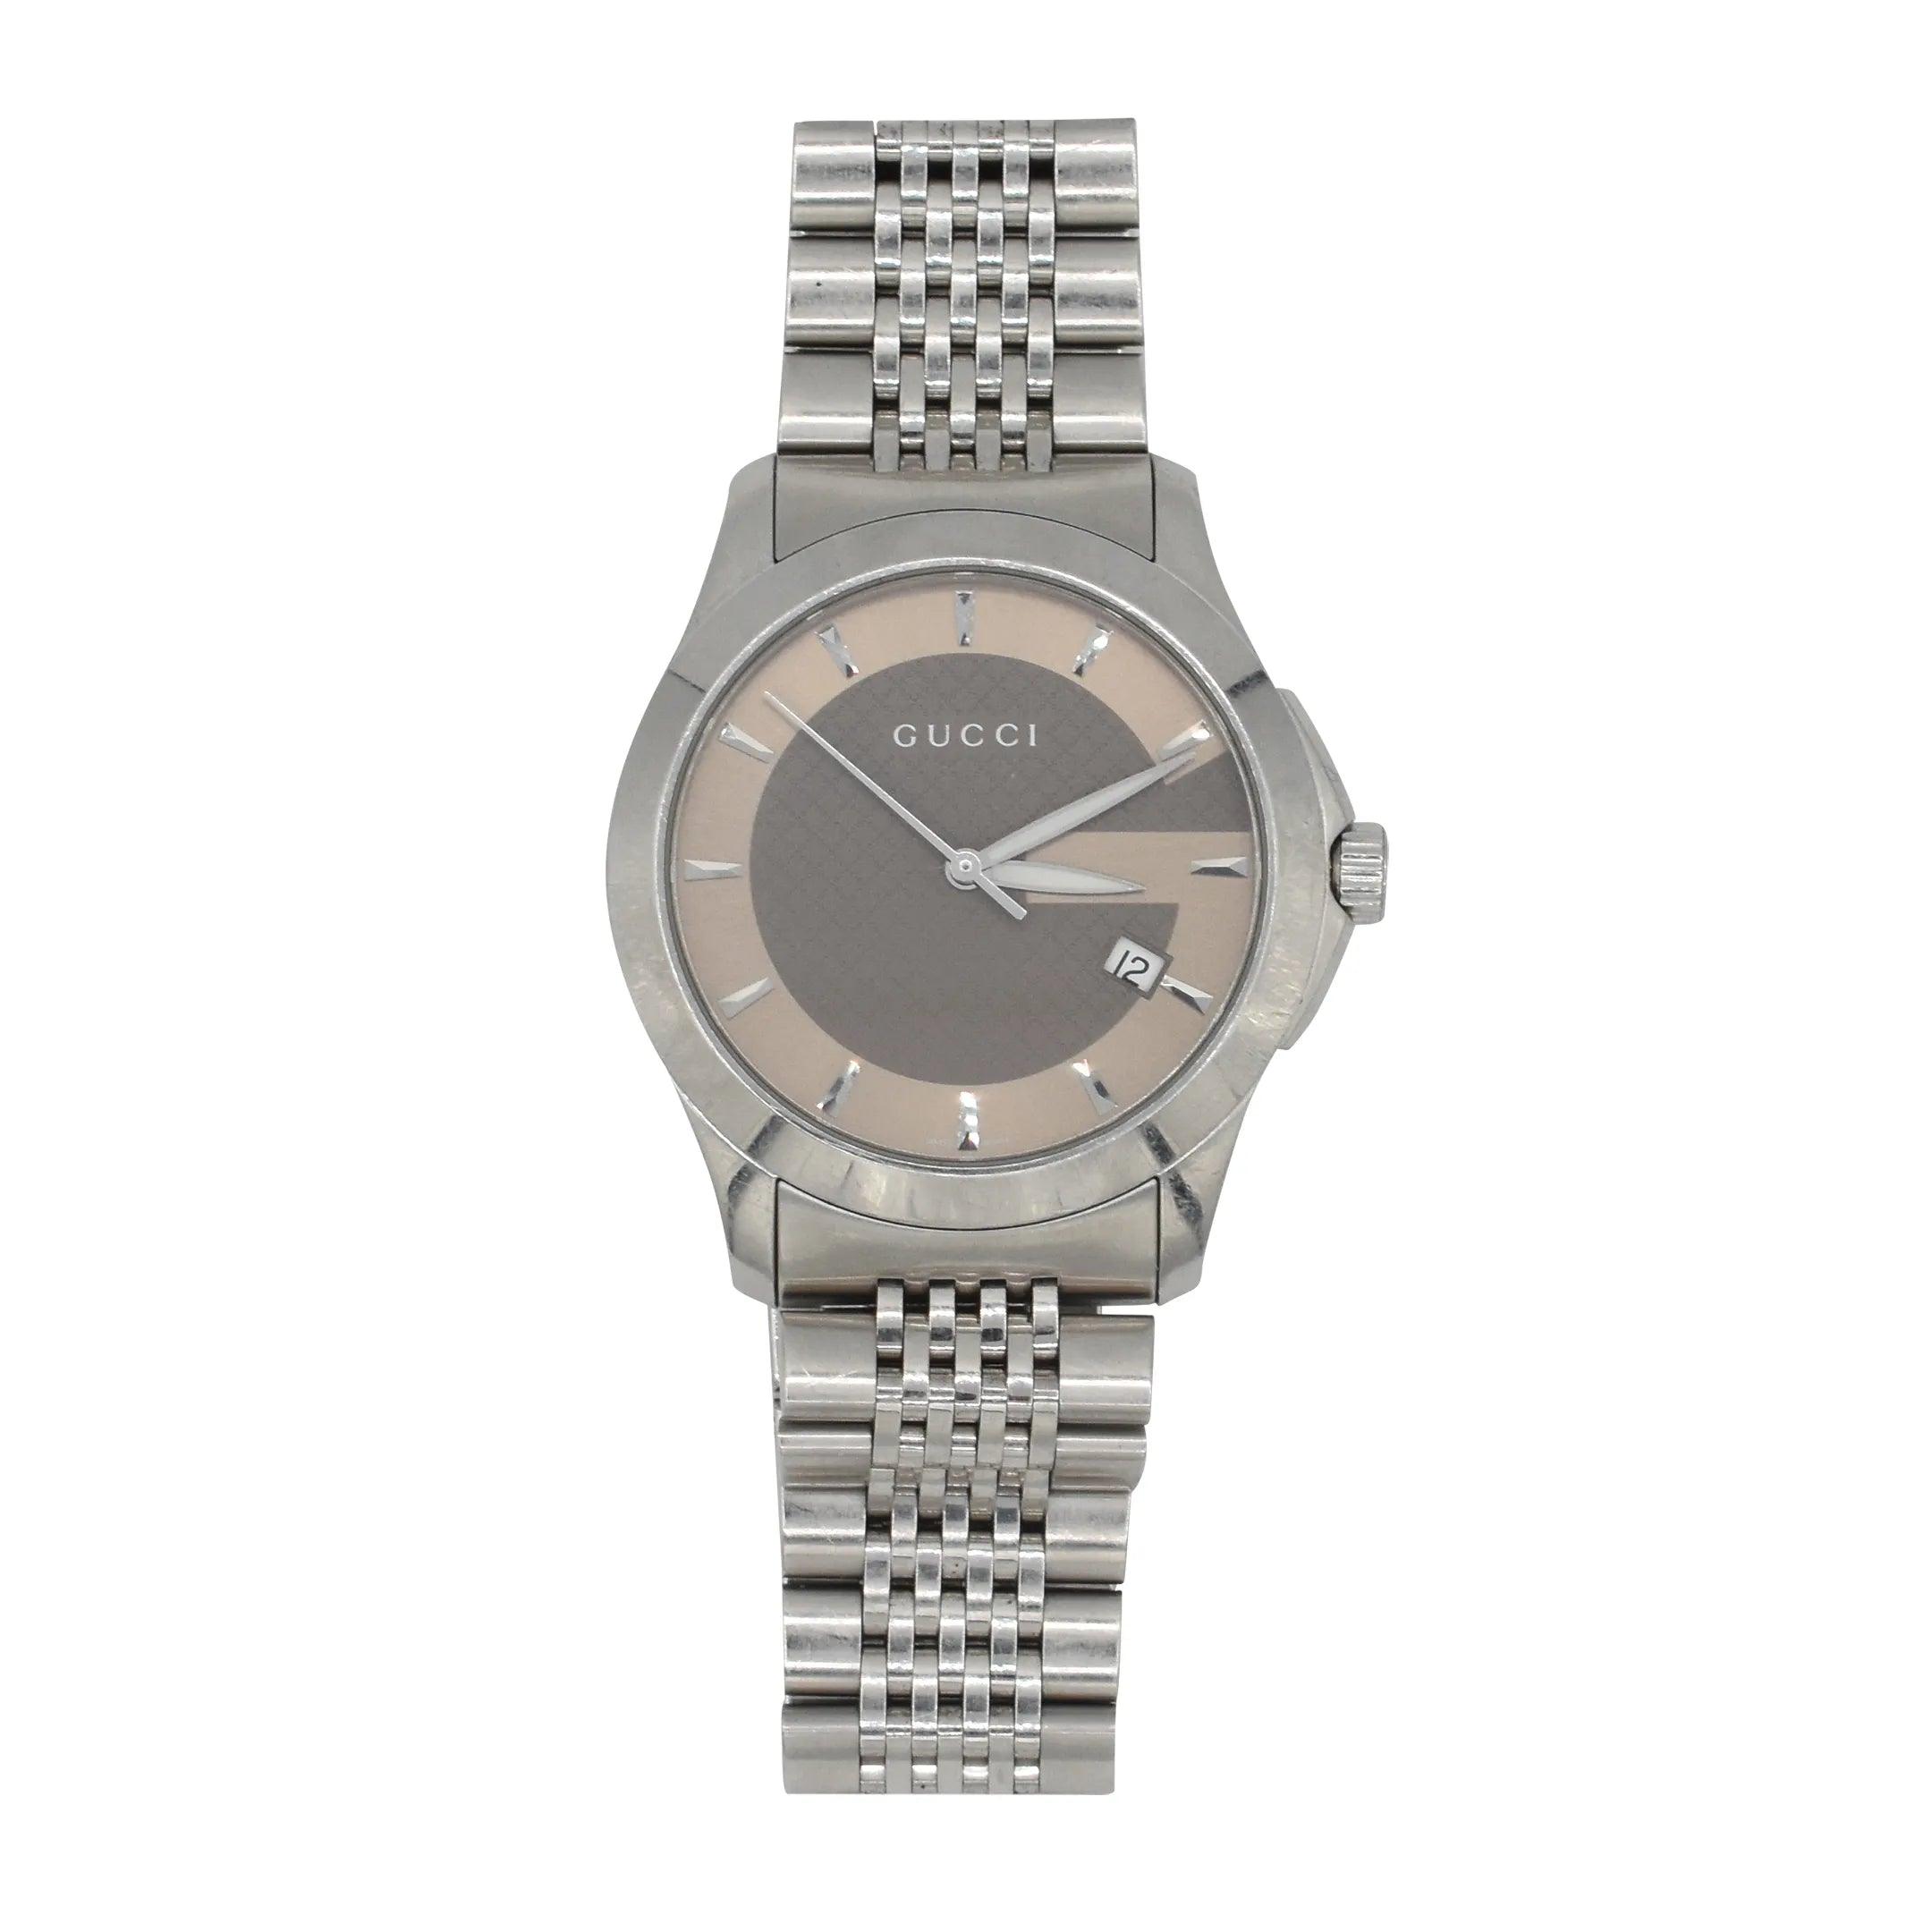 Gucci 'G-Timeless' Watch - Fashionably Yours